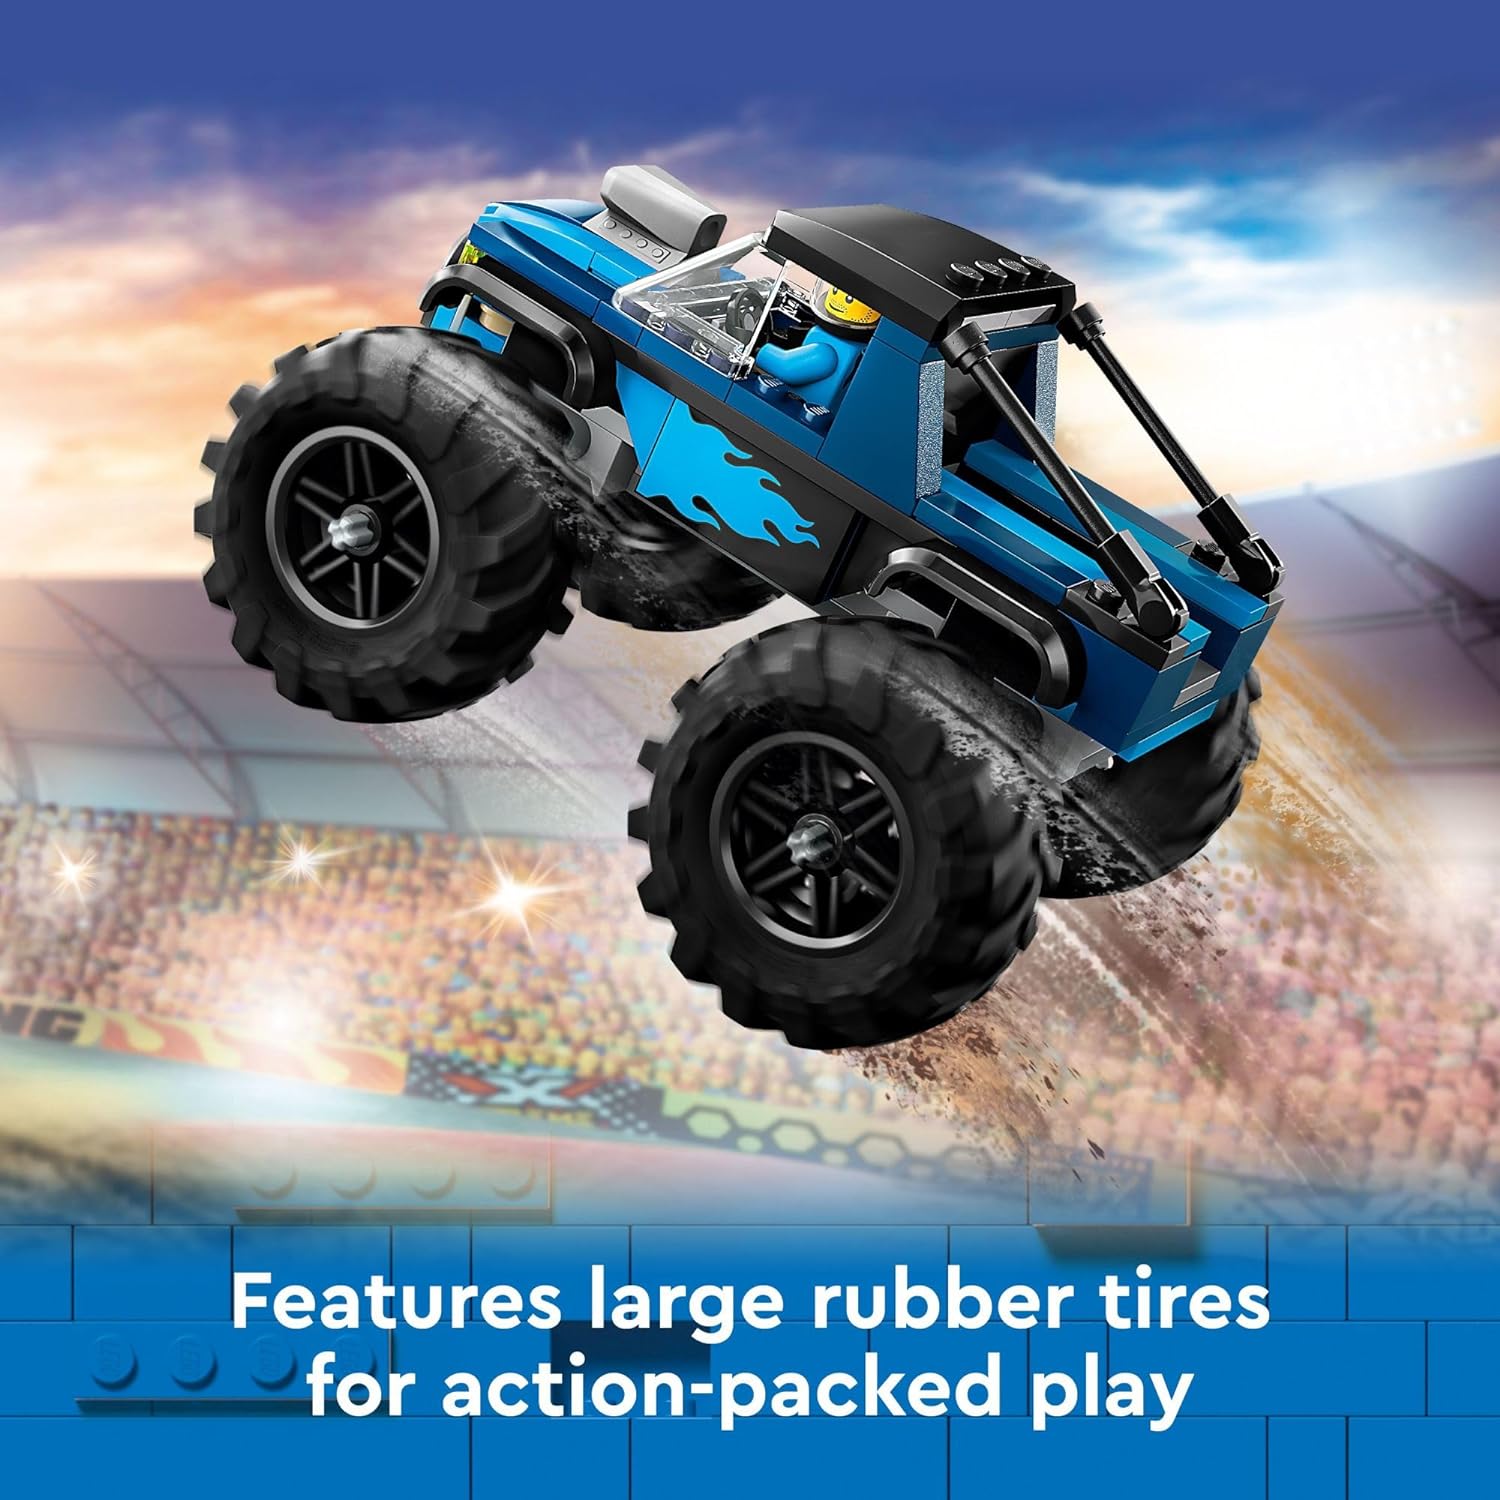 LEGO 60402 City Blue Monster Truck Off-Road Toy Playset with a Driver Minifigure, Imaginative Toys for Kids, Fun Gift for Boys and Girls Aged 5 Plus, Mini Monster Truck.